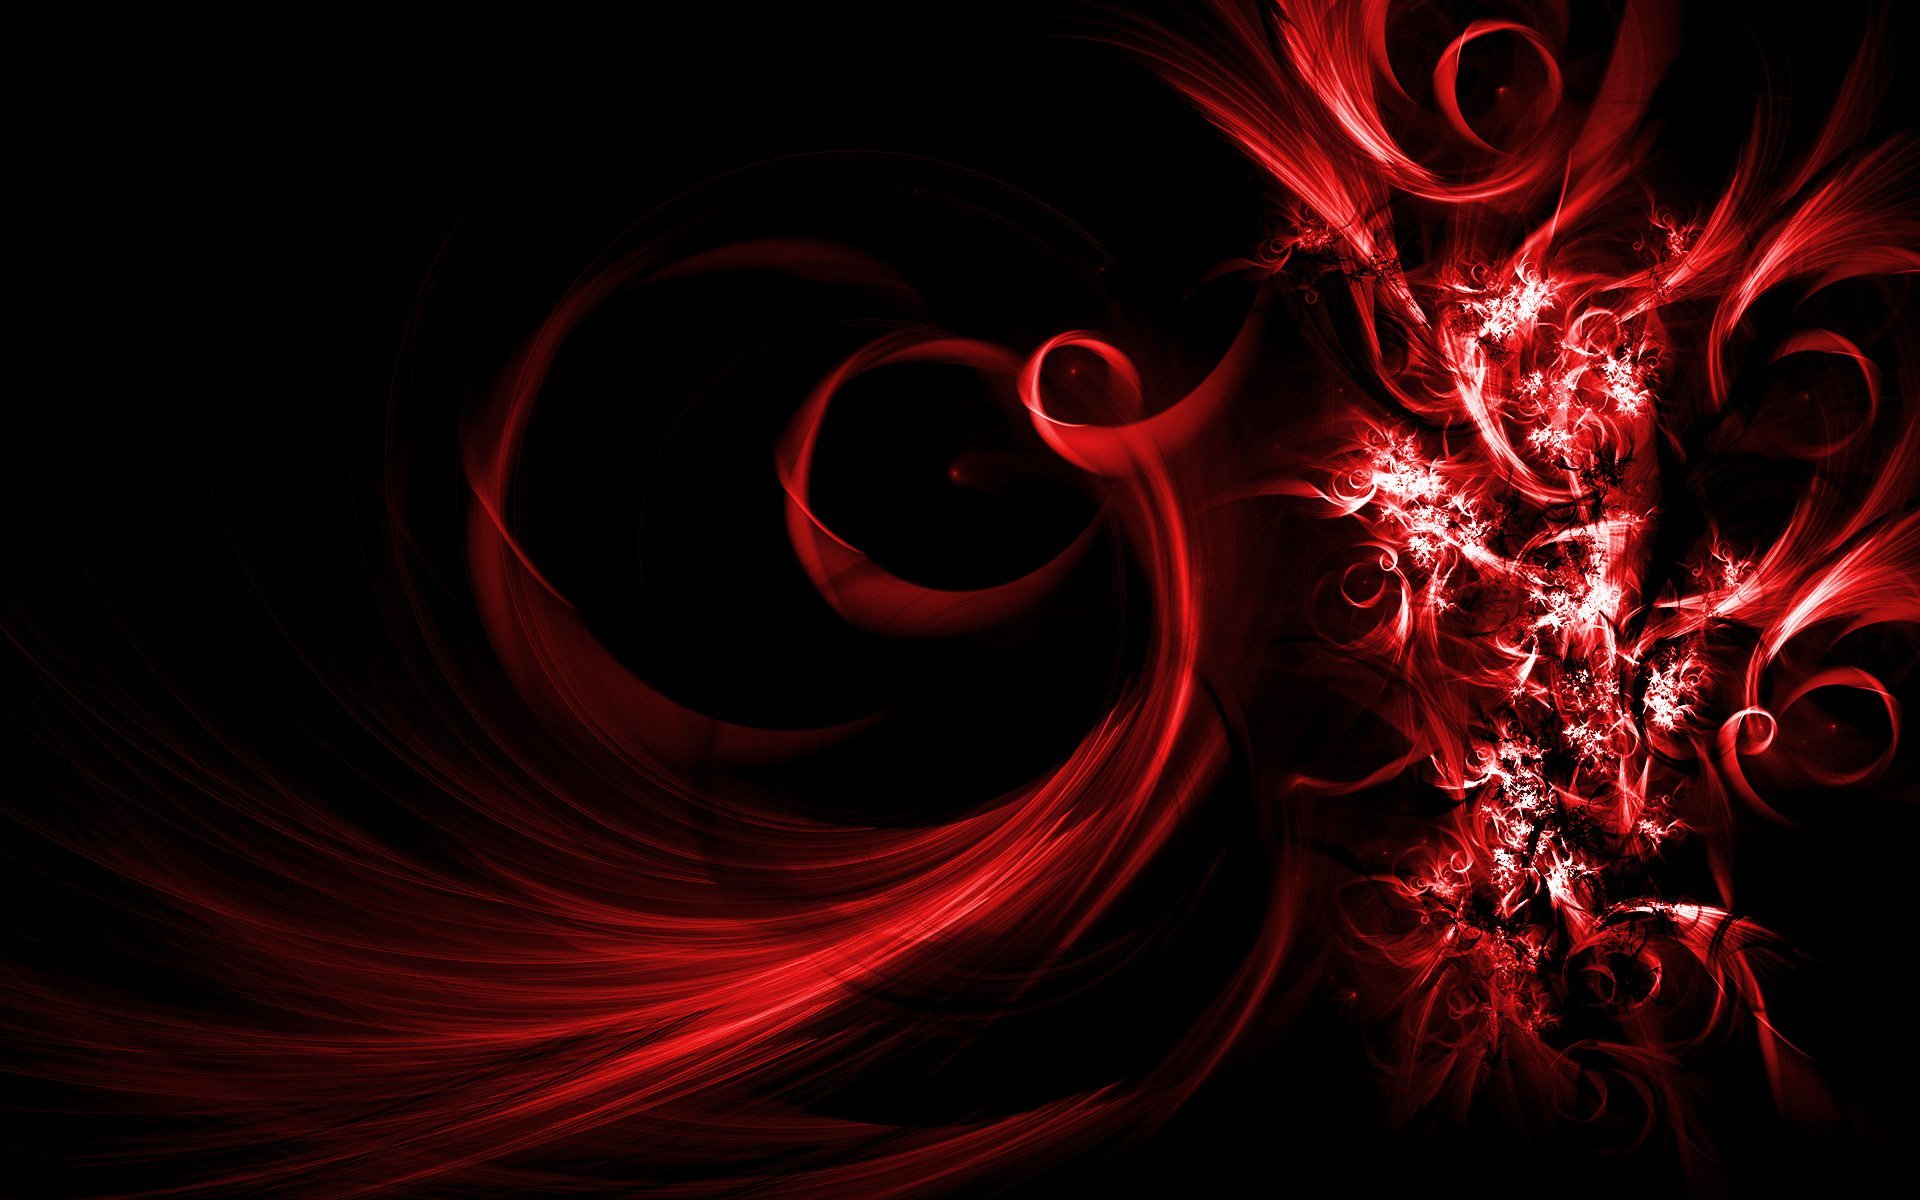 Red abstract wallpaper with swirling lines and flowers - Dark red